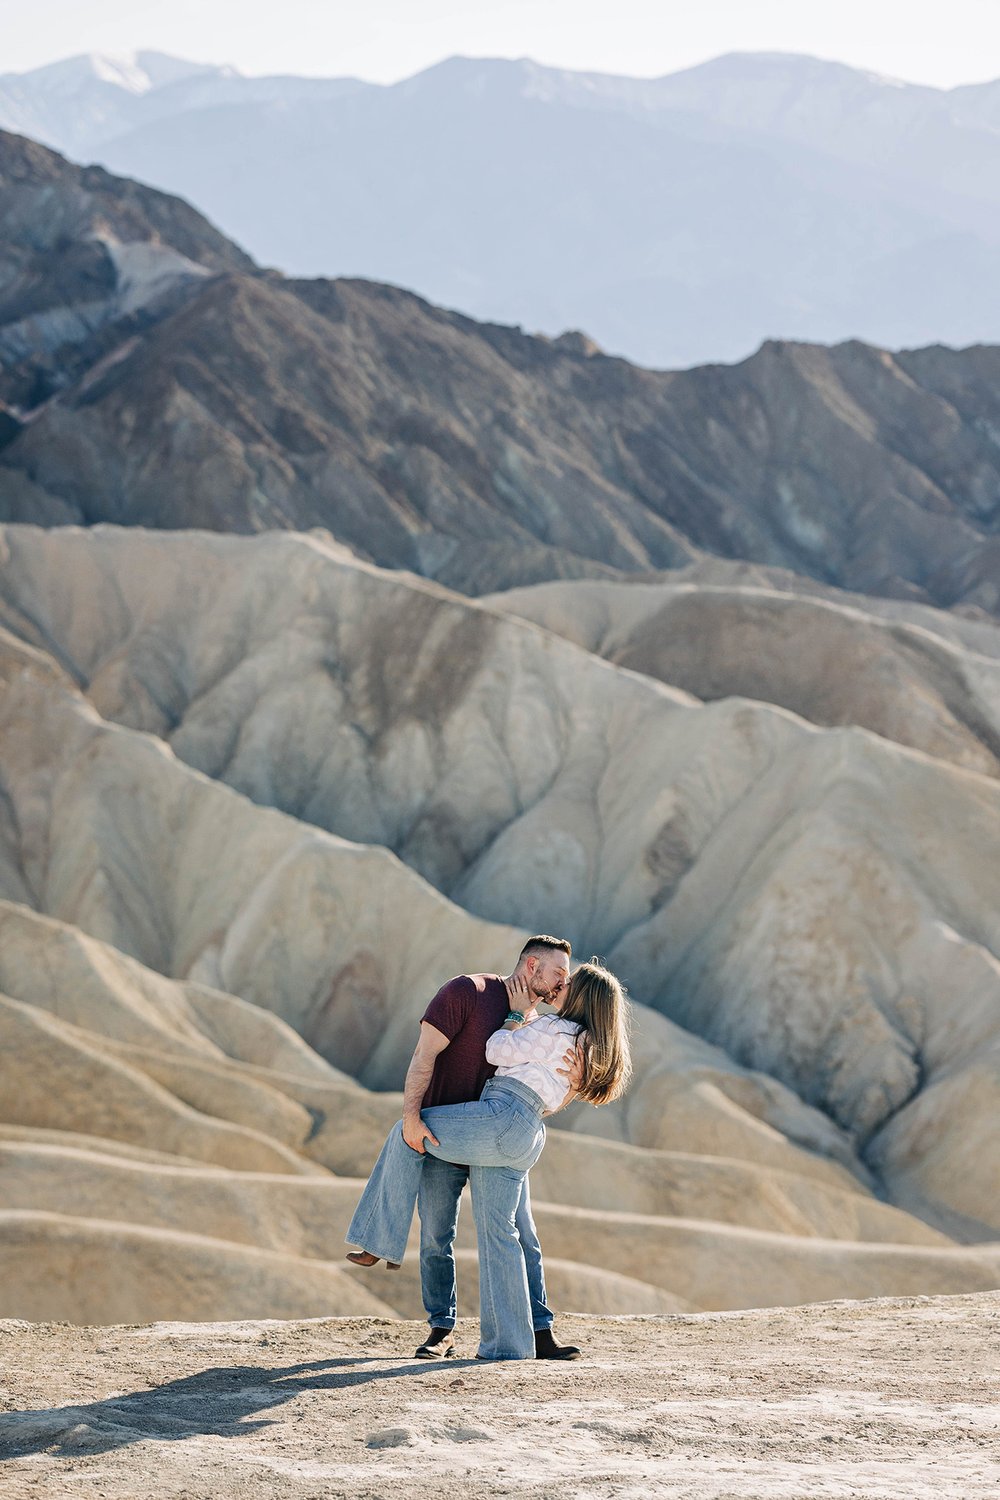 A couple kisses in front of a mountain view.